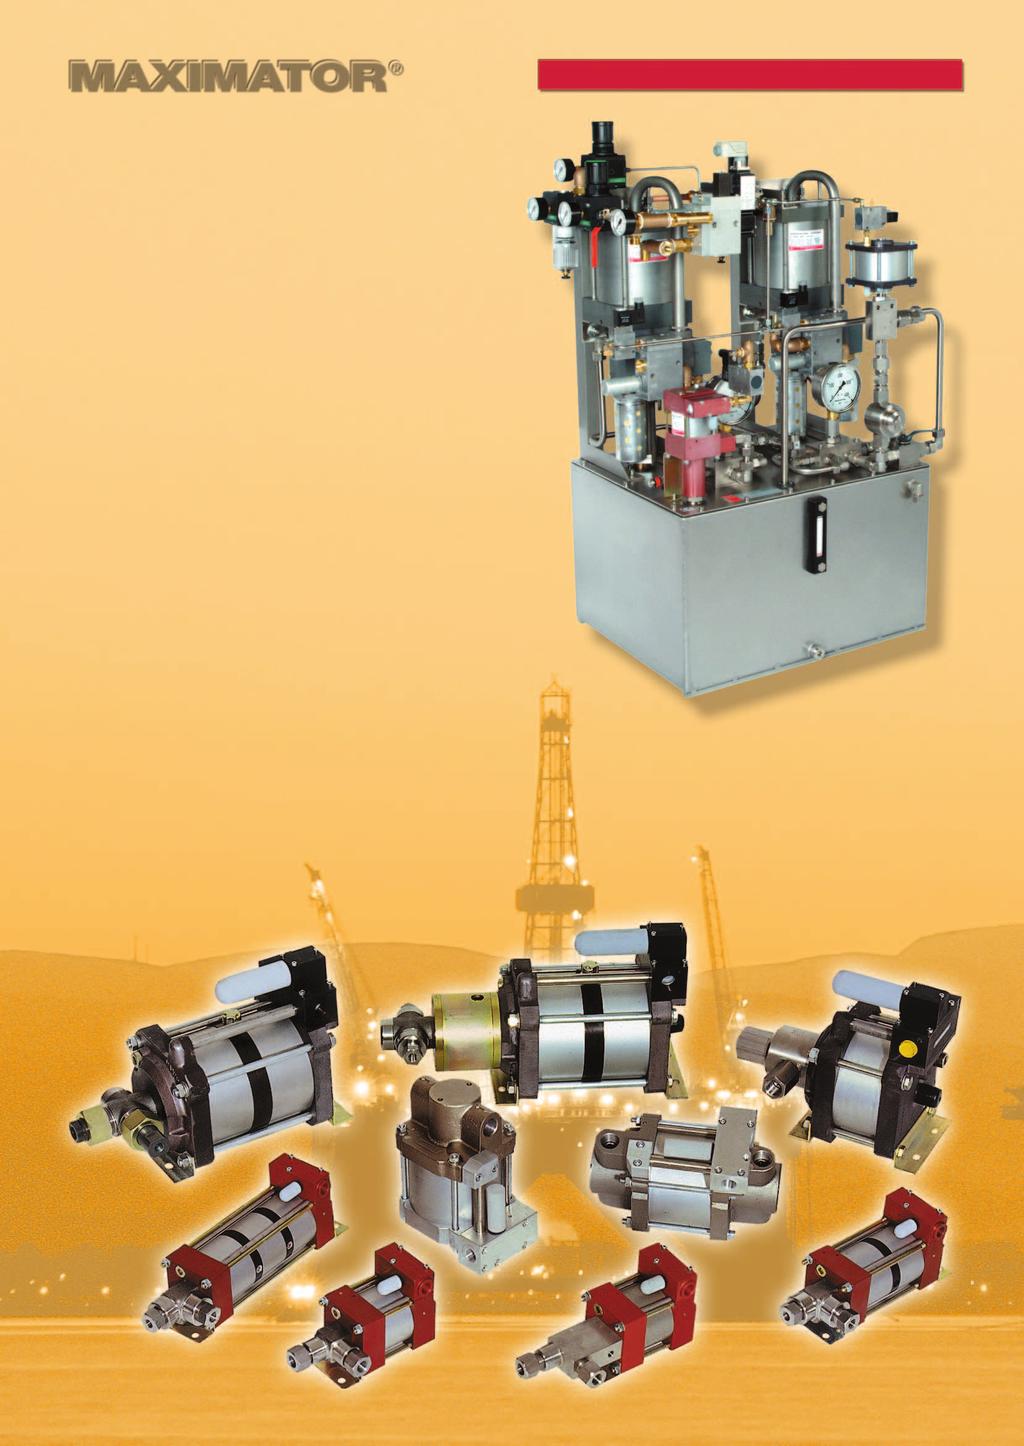 MAXIMATOR is one of the world leading manufacturers of air driven liquid pumps, air amplifiers, gas boosters, high pressure valves, fittings and tubing as well as associated products used in the oil